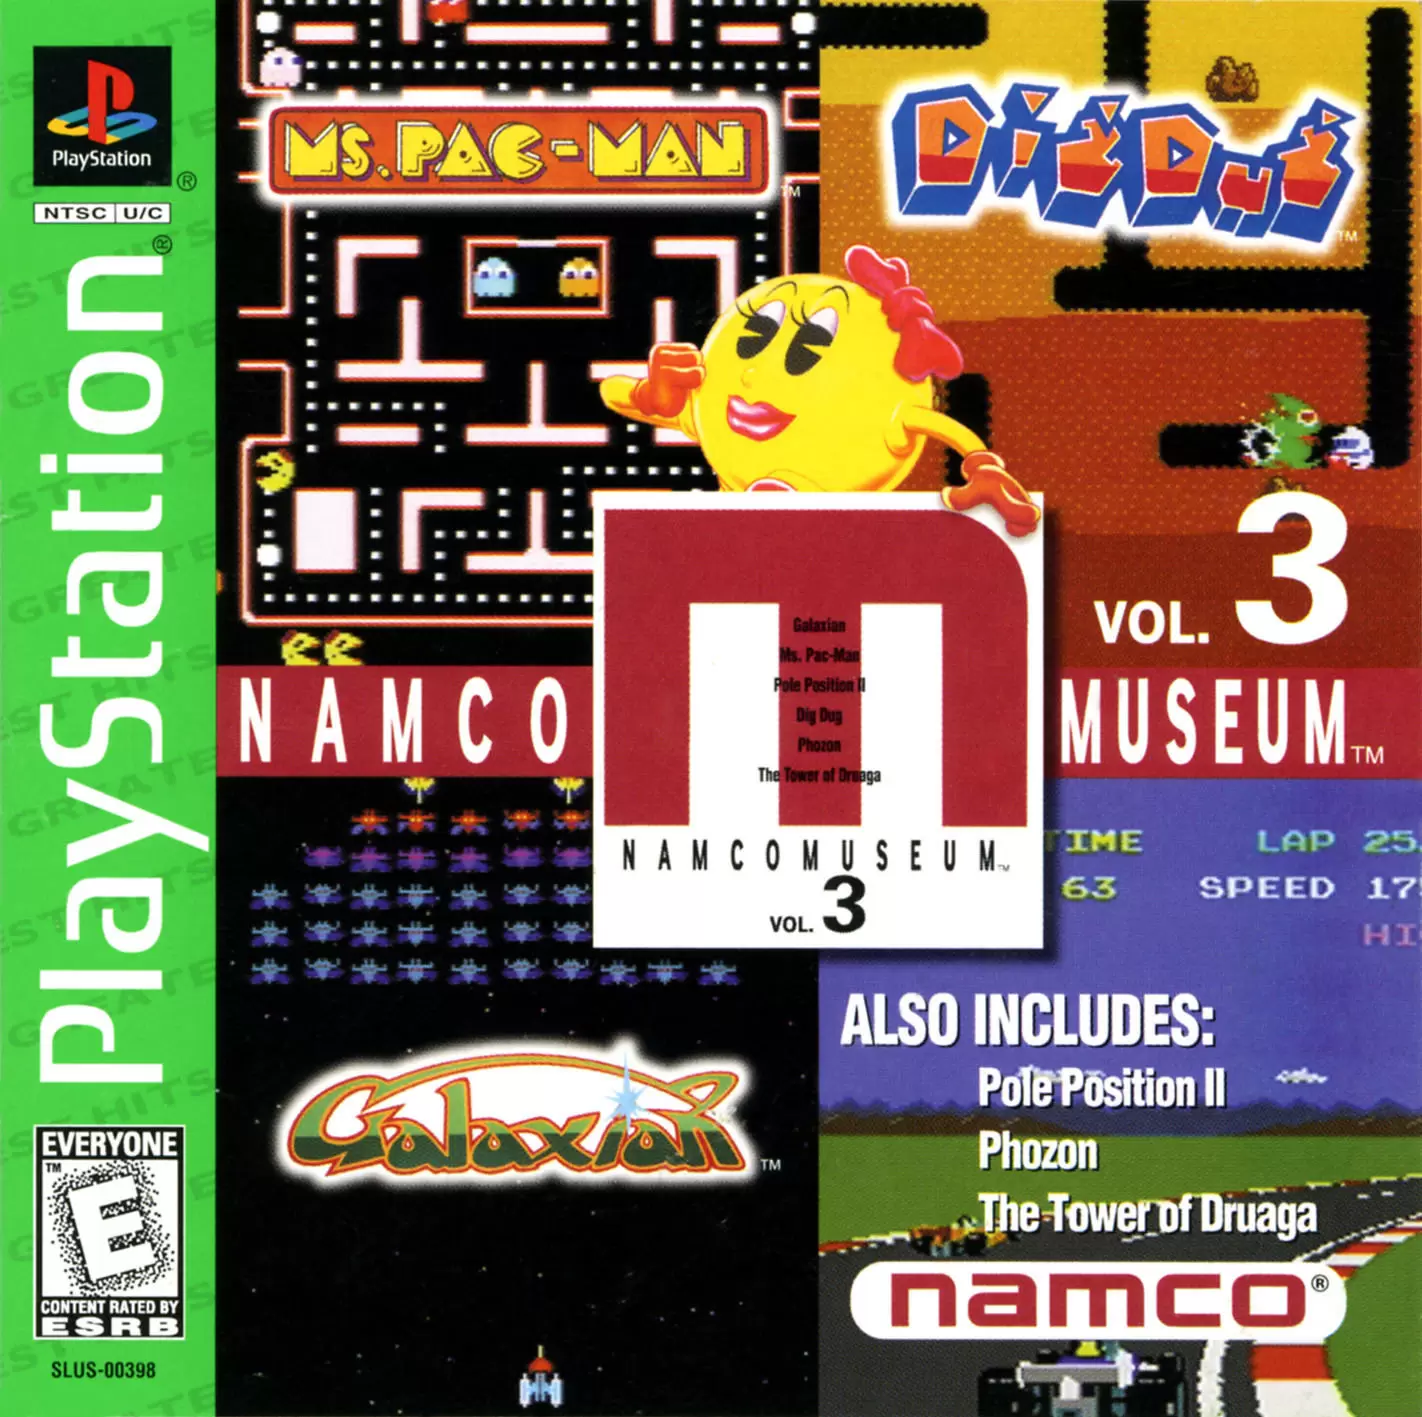 Jeux Playstation PS1 - Namco Museum Vol. 3